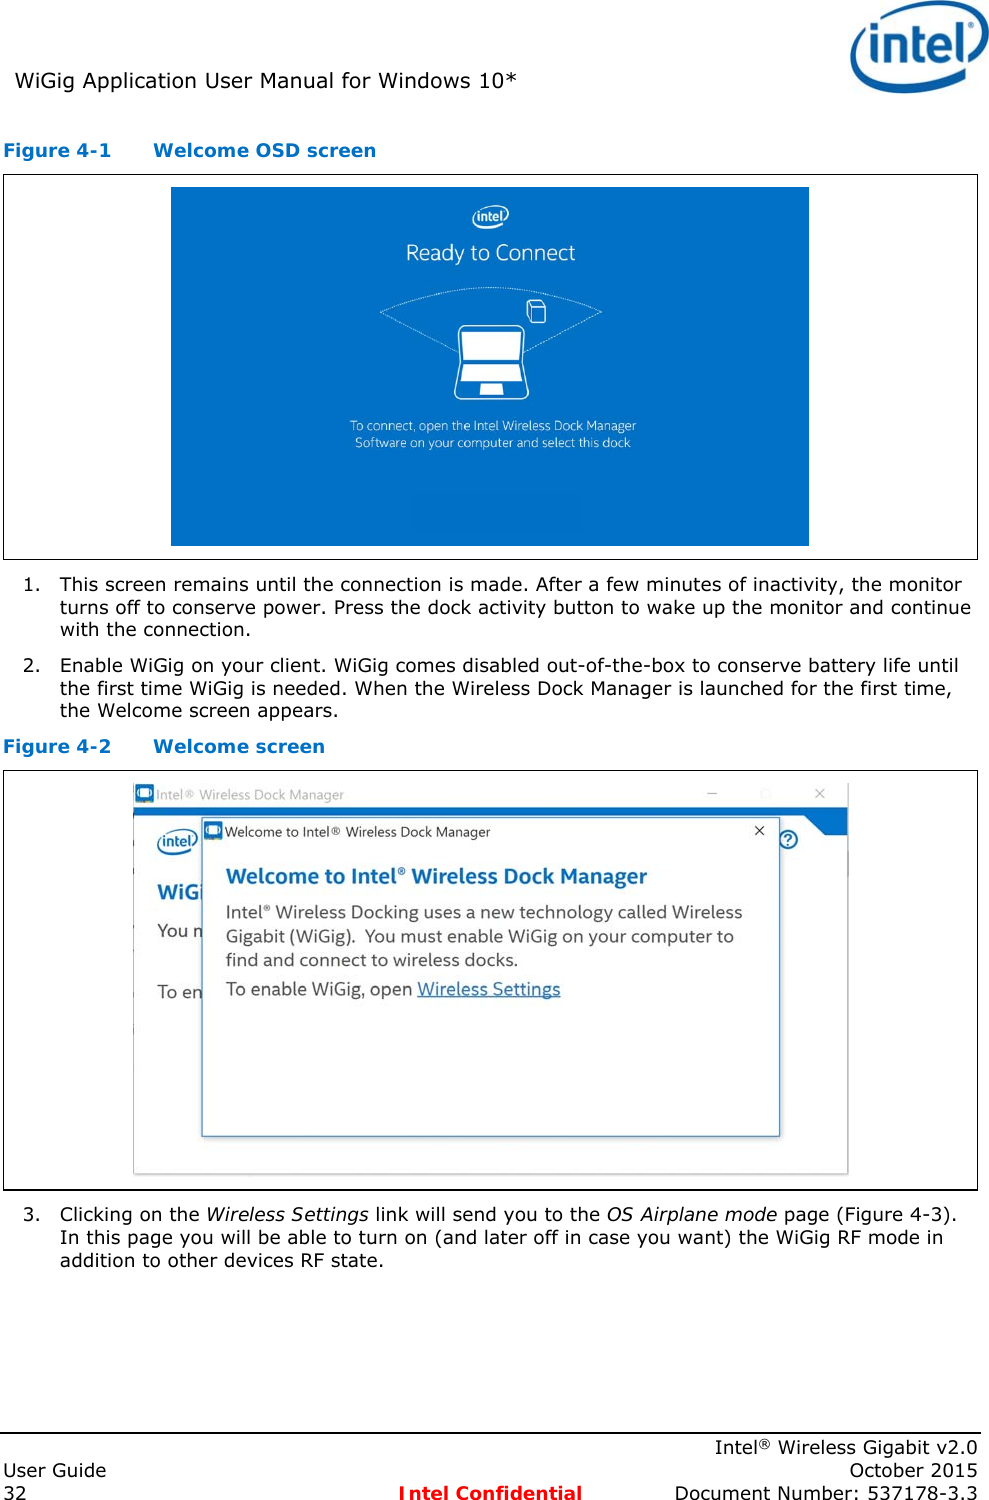 WiGig Application User Manual for Windows 10*      Intel® Wireless Gigabit v2.0 User Guide    October 2015 32 Intel Confidential  Document Number: 537178-3.3 Figure 4-1  Welcome OSD screen  1. This screen remains until the connection is made. After a few minutes of inactivity, the monitor turns off to conserve power. Press the dock activity button to wake up the monitor and continue with the connection. 2. Enable WiGig on your client. WiGig comes disabled out-of-the-box to conserve battery life until the first time WiGig is needed. When the Wireless Dock Manager is launched for the first time, the Welcome screen appears. Figure 4-2  Welcome screen  3. Clicking on the Wireless Settings link will send you to the OS Airplane mode page (Figure 4-3). In this page you will be able to turn on (and later off in case you want) the WiGig RF mode in addition to other devices RF state. 